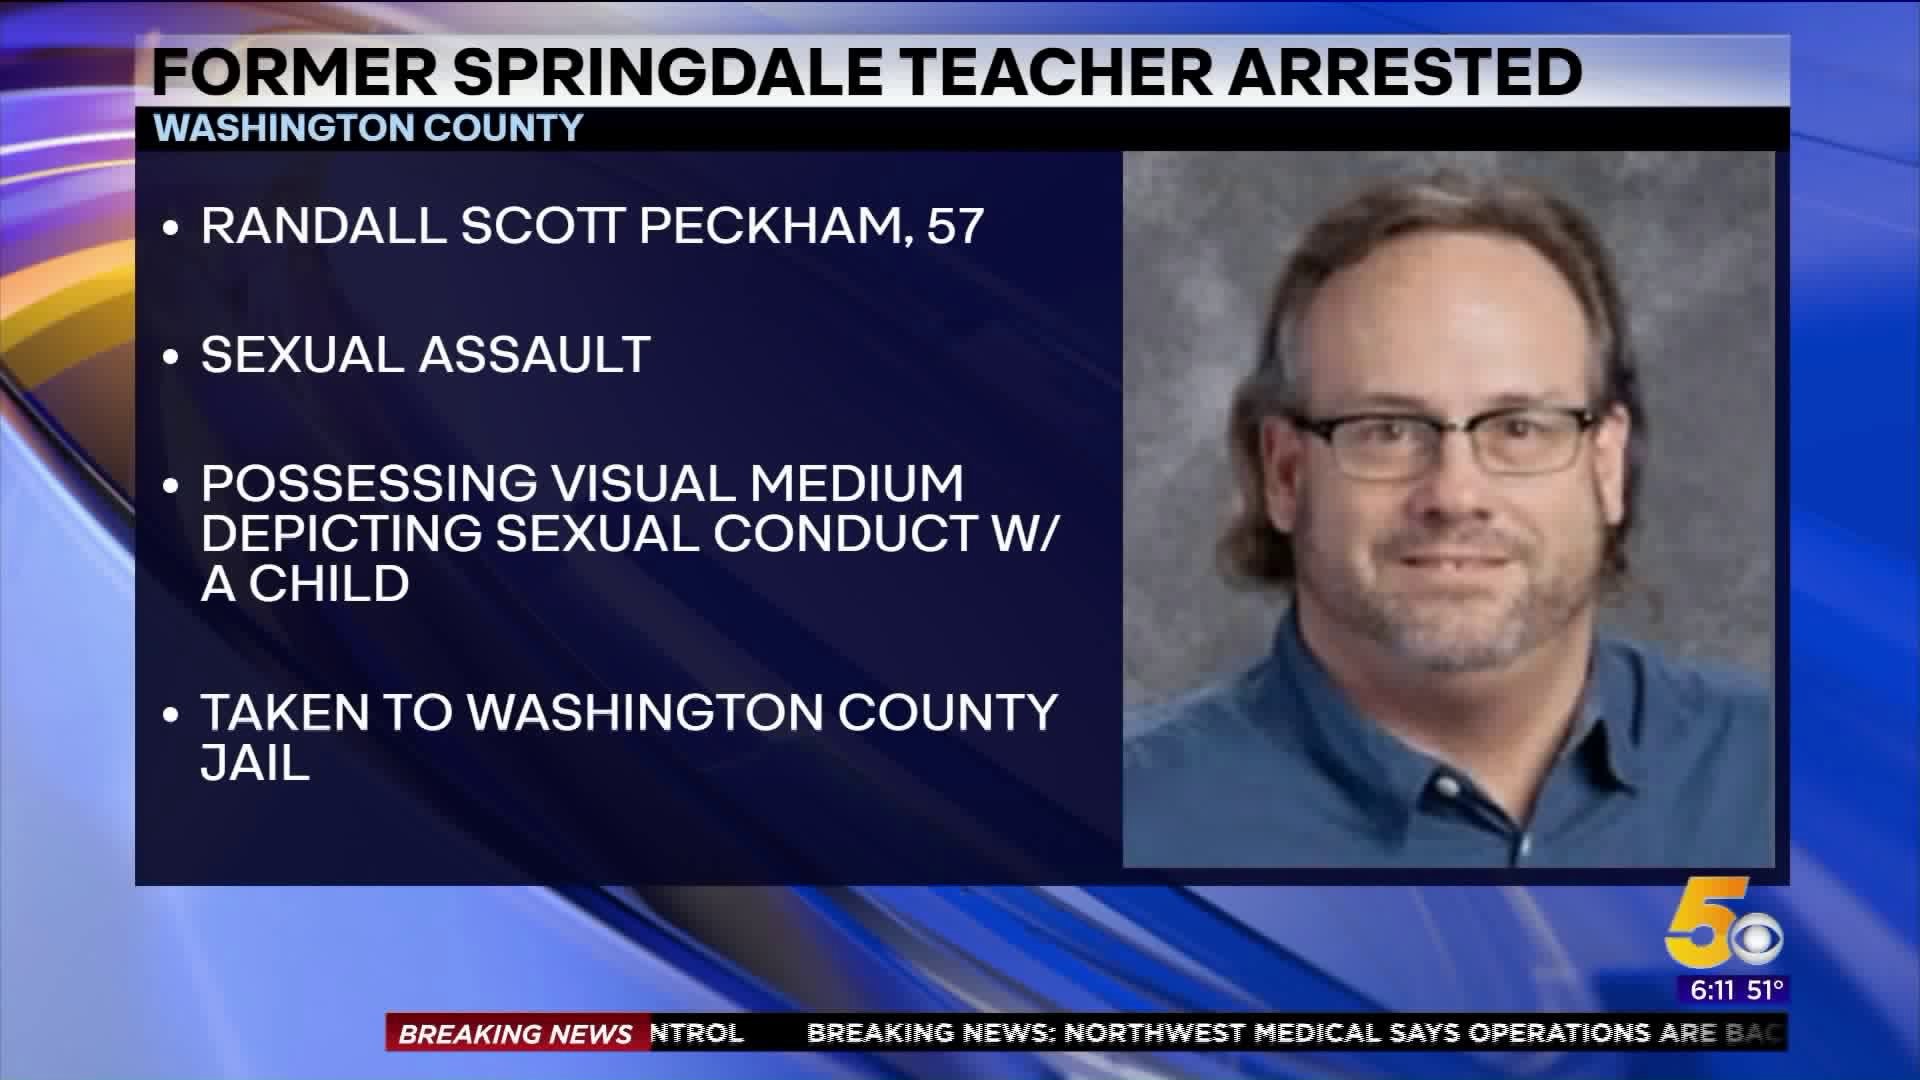 Ex-Springdale Teacher Arrested Following Allegations Of Inappropriate Behavior With Student